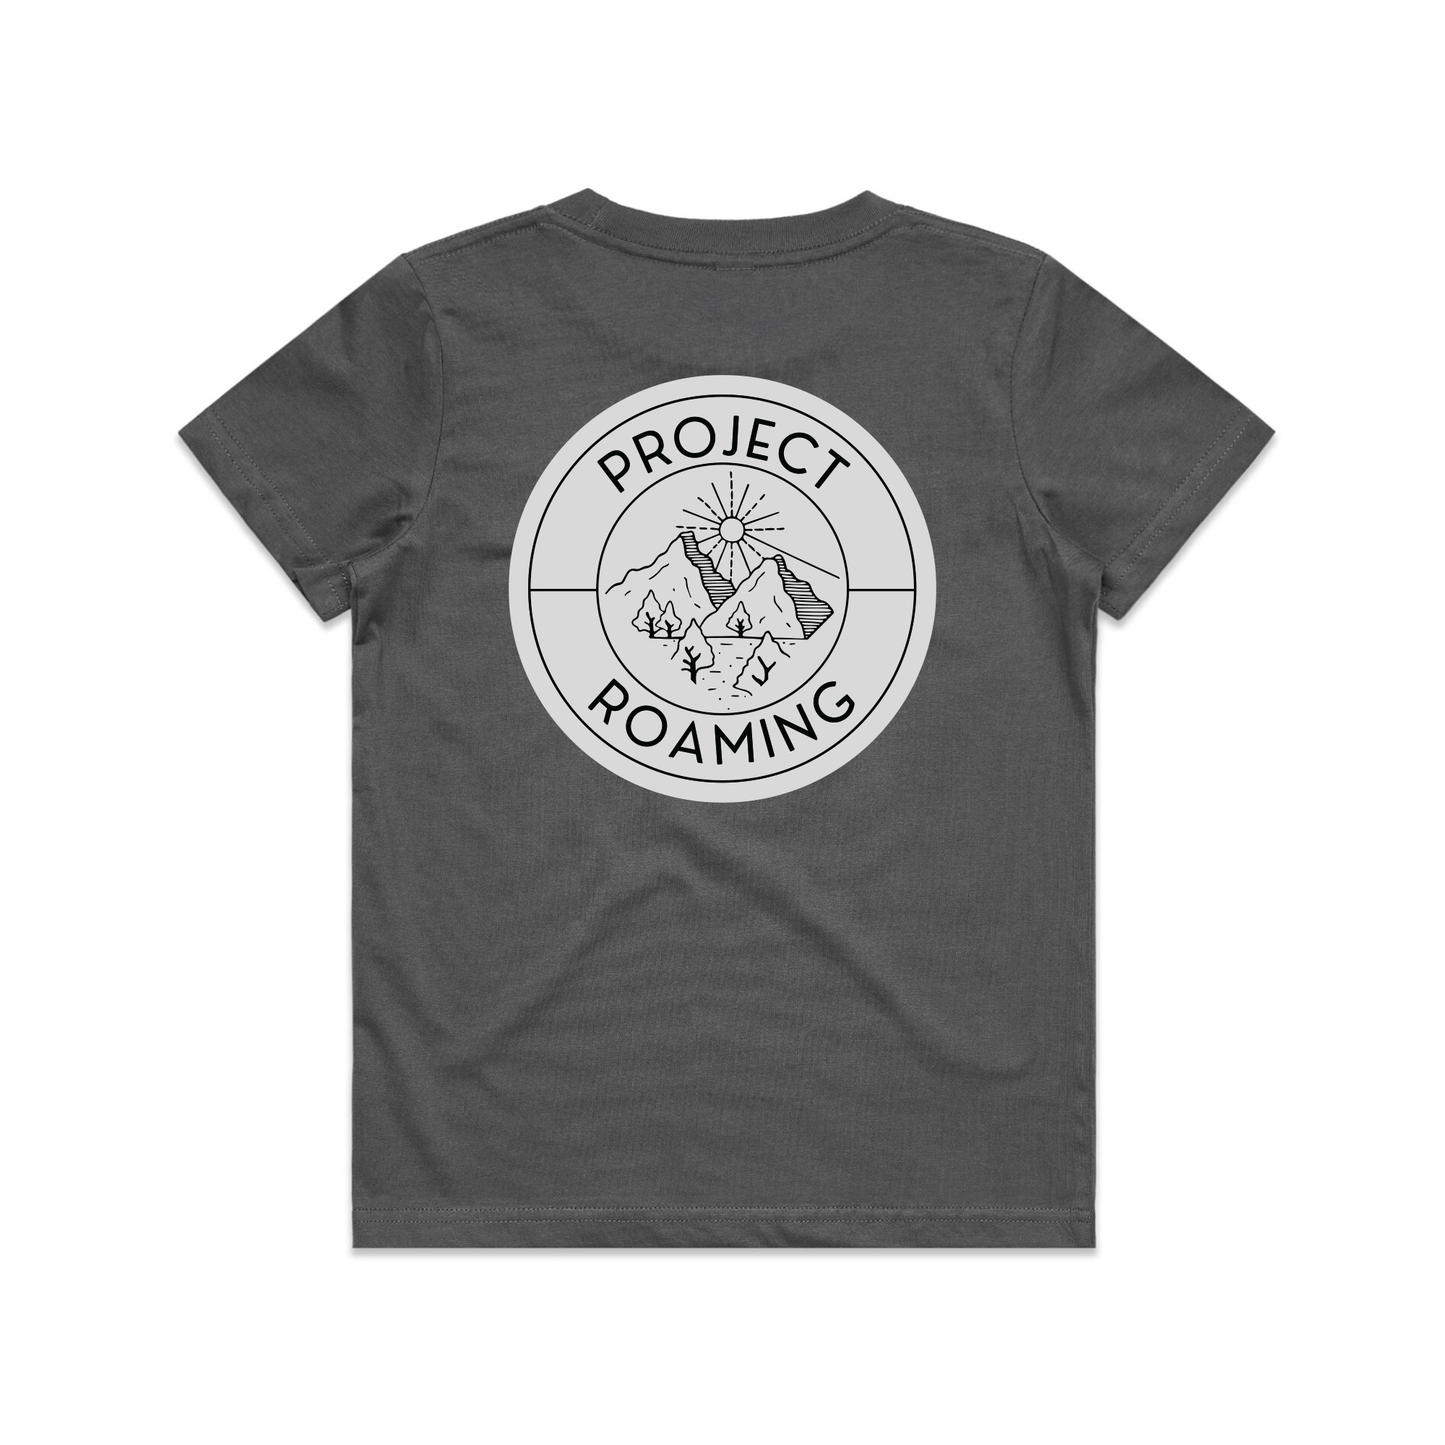 Project Roaming Youth Tee